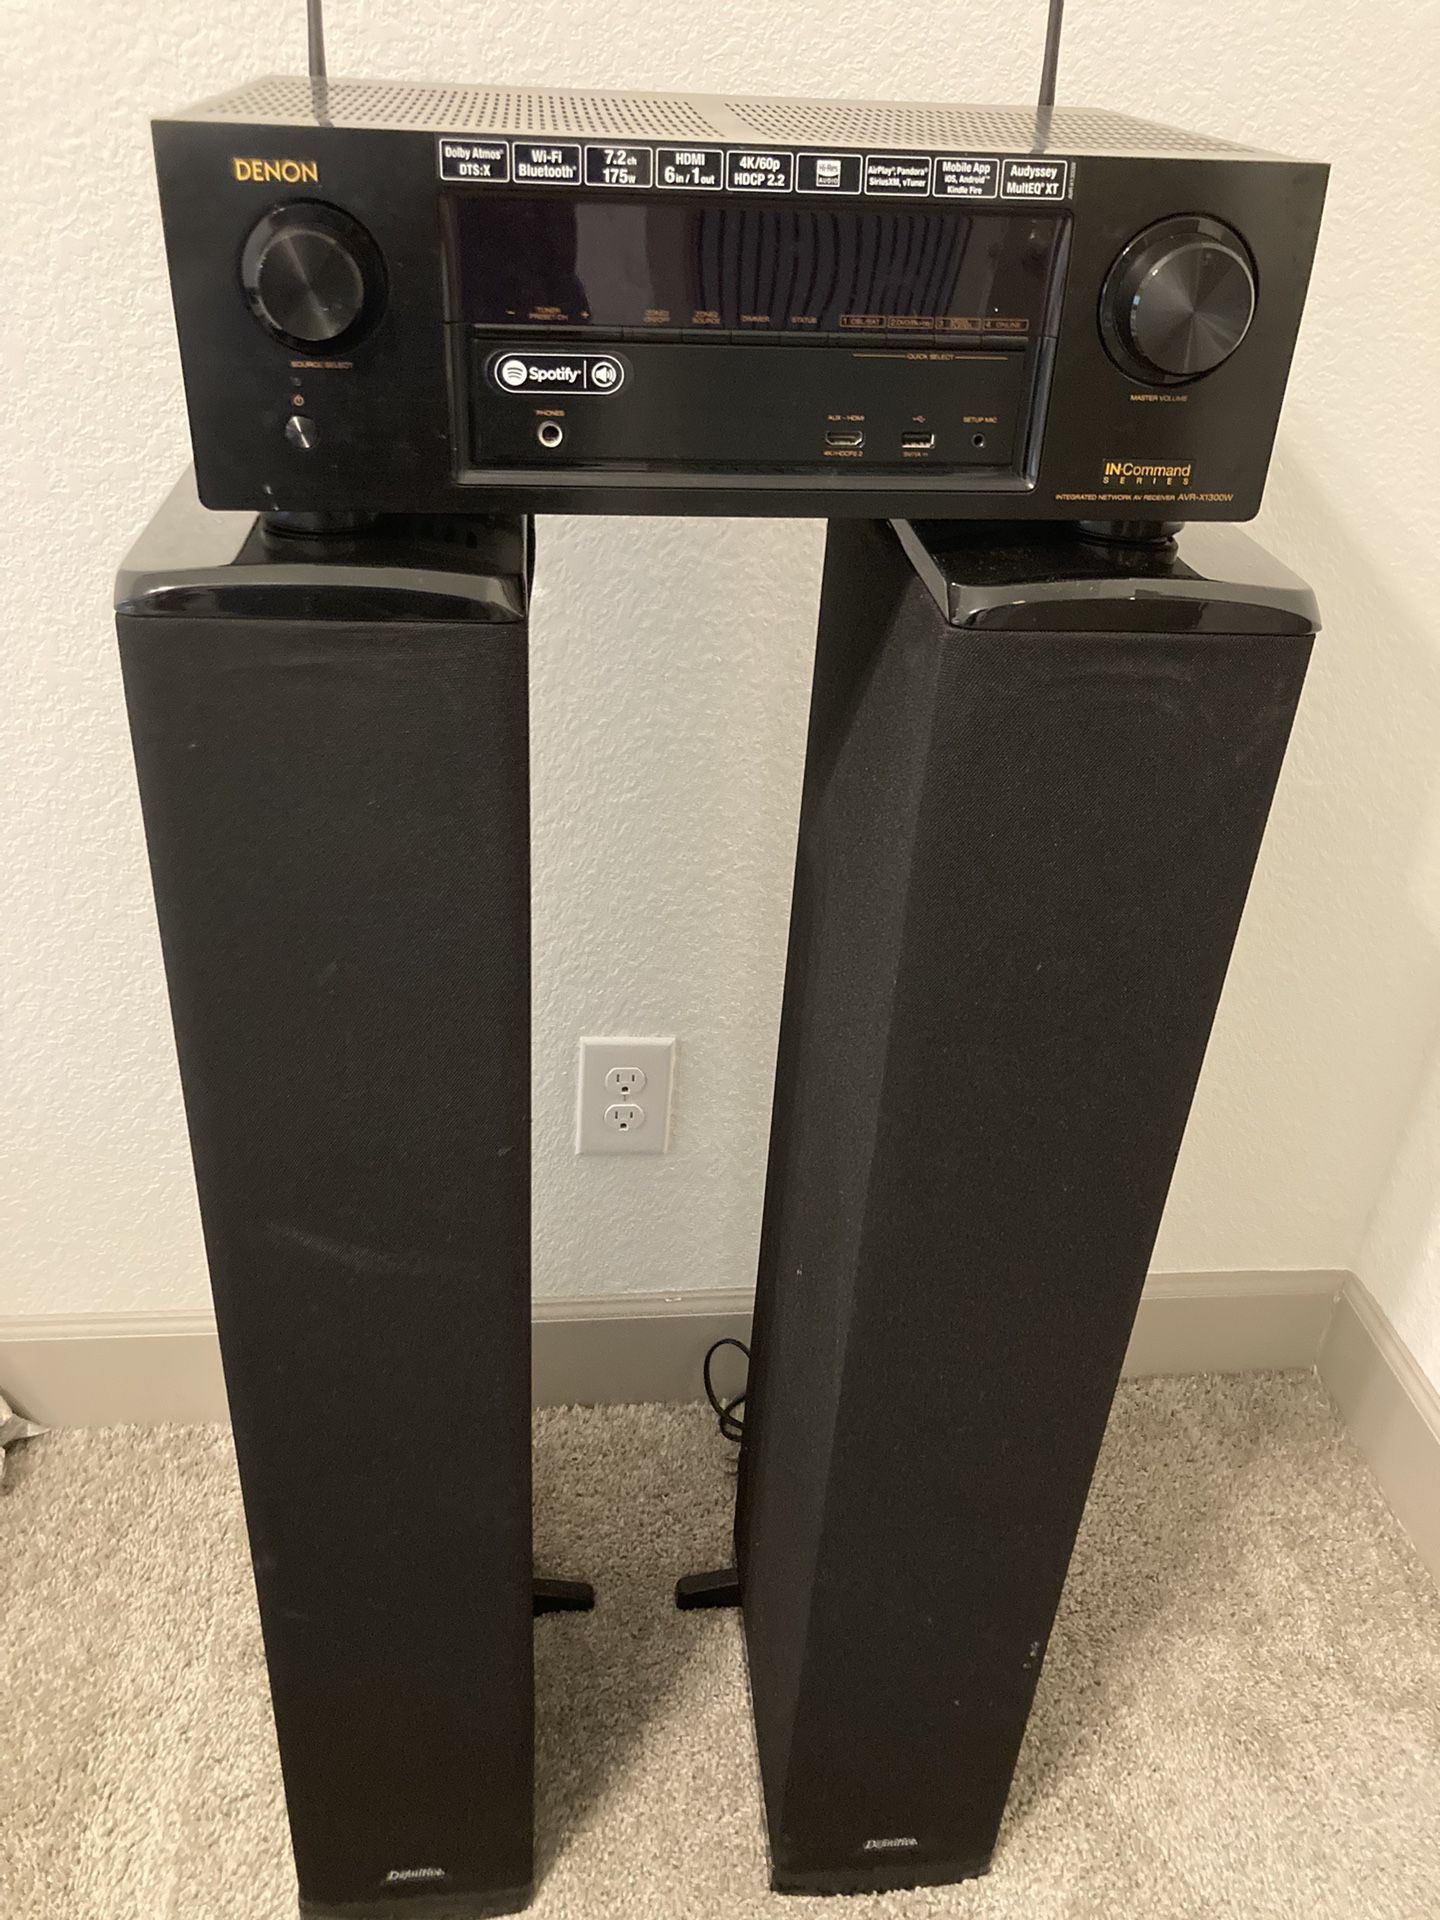 Definitive Tower Speakers And Denon 7.1 receiver